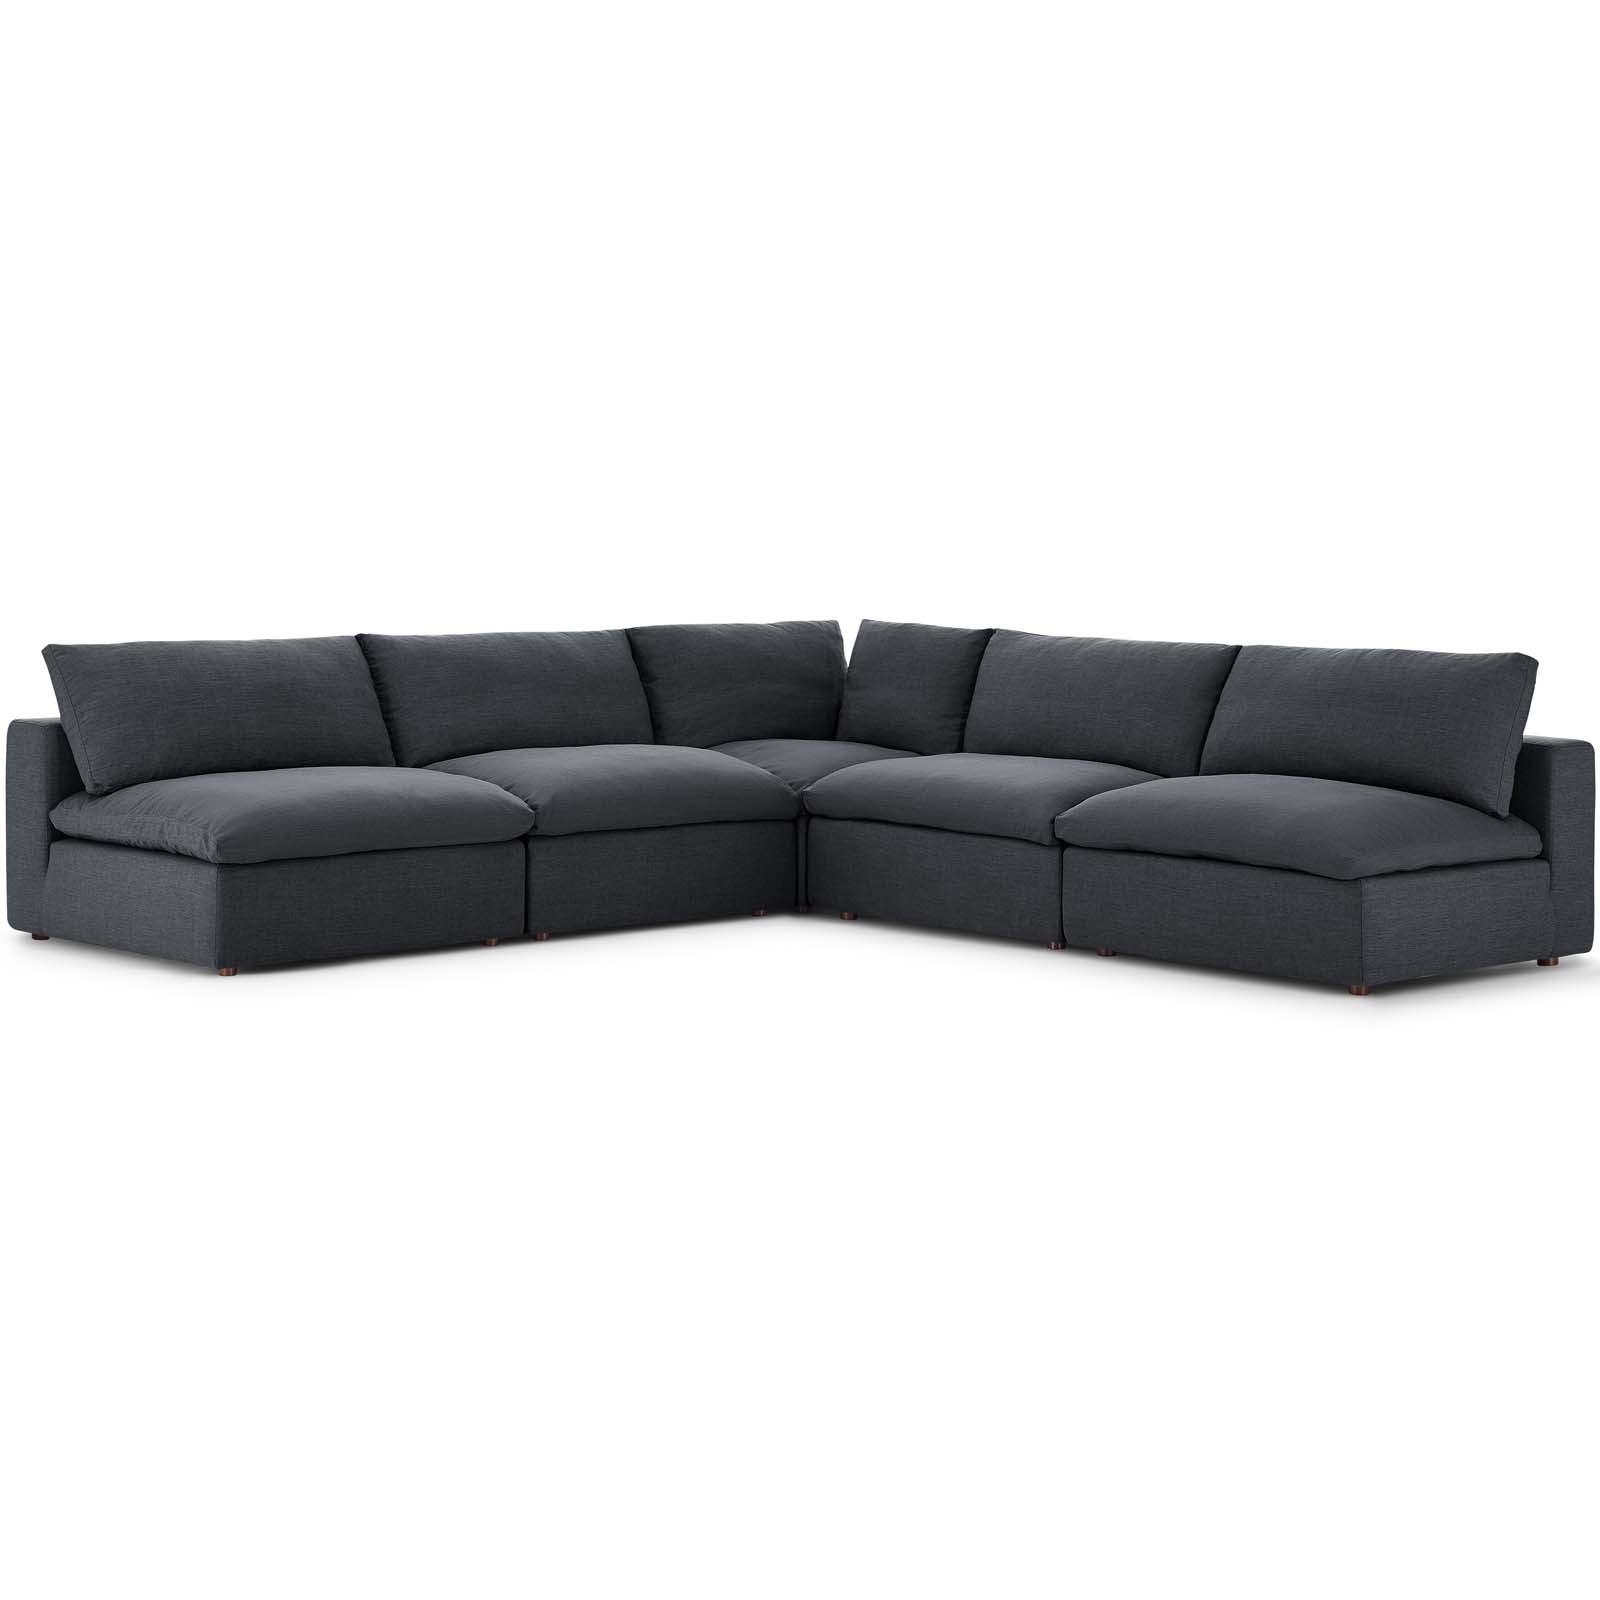 Commix Down Filled Overstuffed 5 Piece Sectional Sofa Set - East Shore Modern Home Furnishings